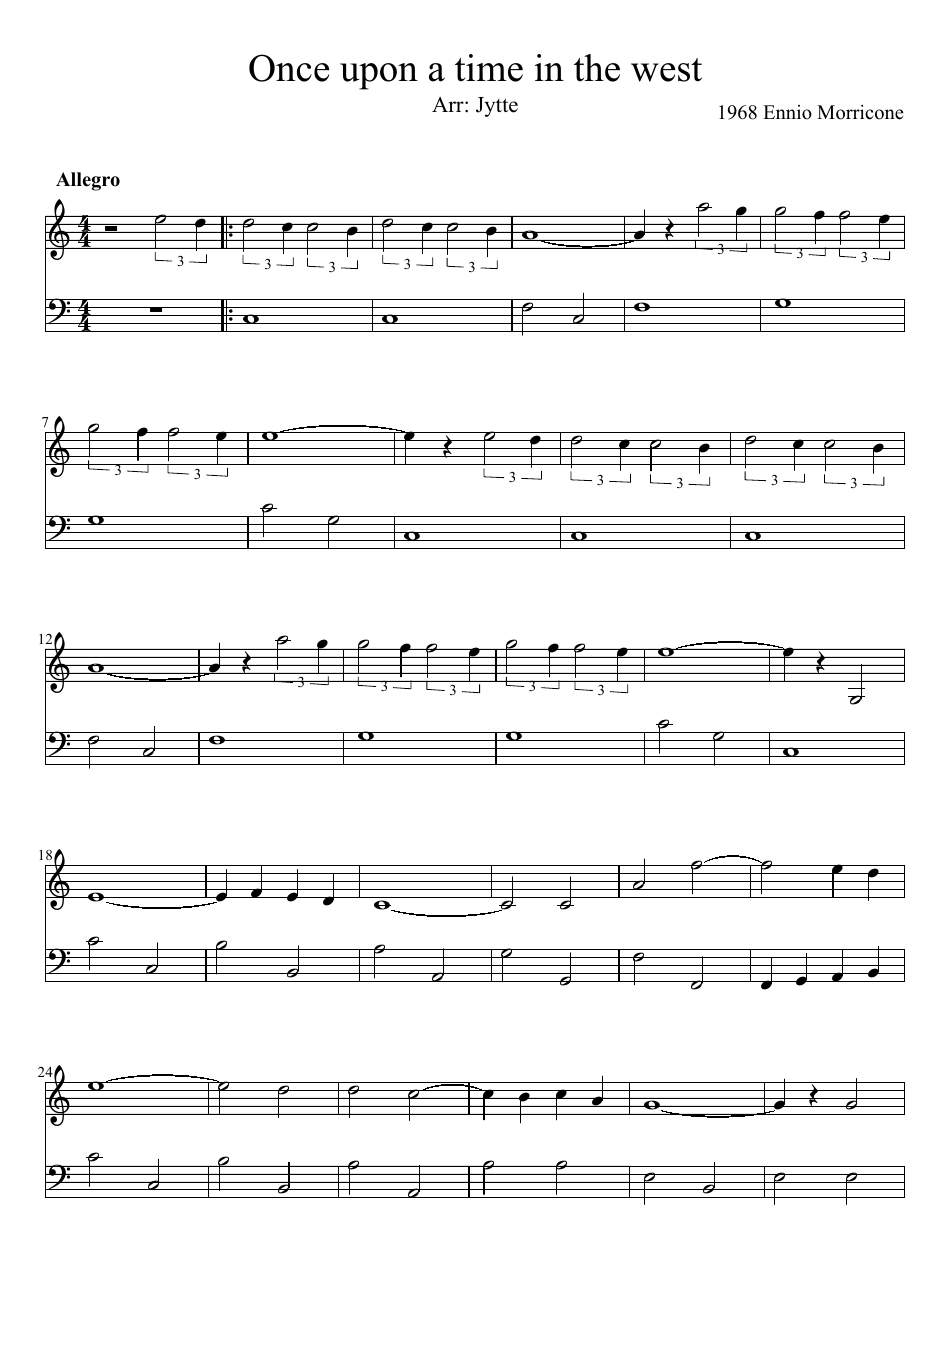 Ennio Morricone - Once Upon a Time in the West Piano Sheet Music preview image